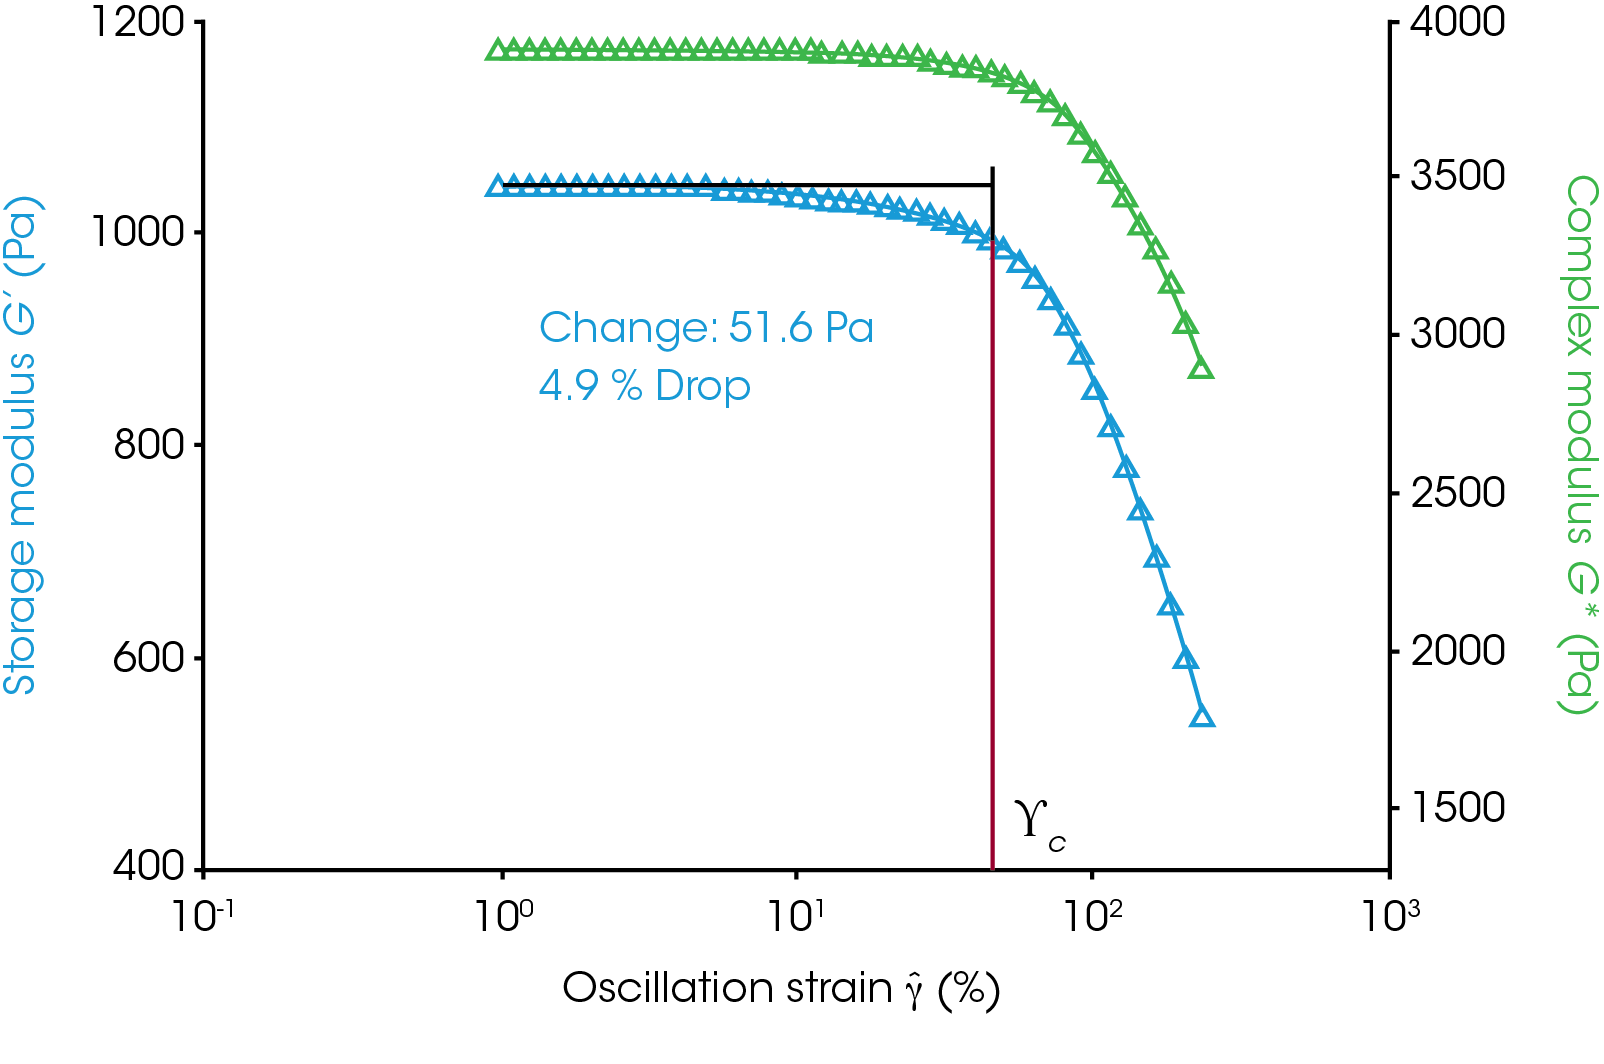 Figure 3. Storage and complex modulus of polystyrene (250 °C, 1 Hz) and the critical strain (γc ). The critical strain (44%) is the end of the LVR where the storage modulus begins to decrease with increasing strain. The storage modulus is more sensitive to the effect of high strain and decreases more dramatically than the complex modulus.